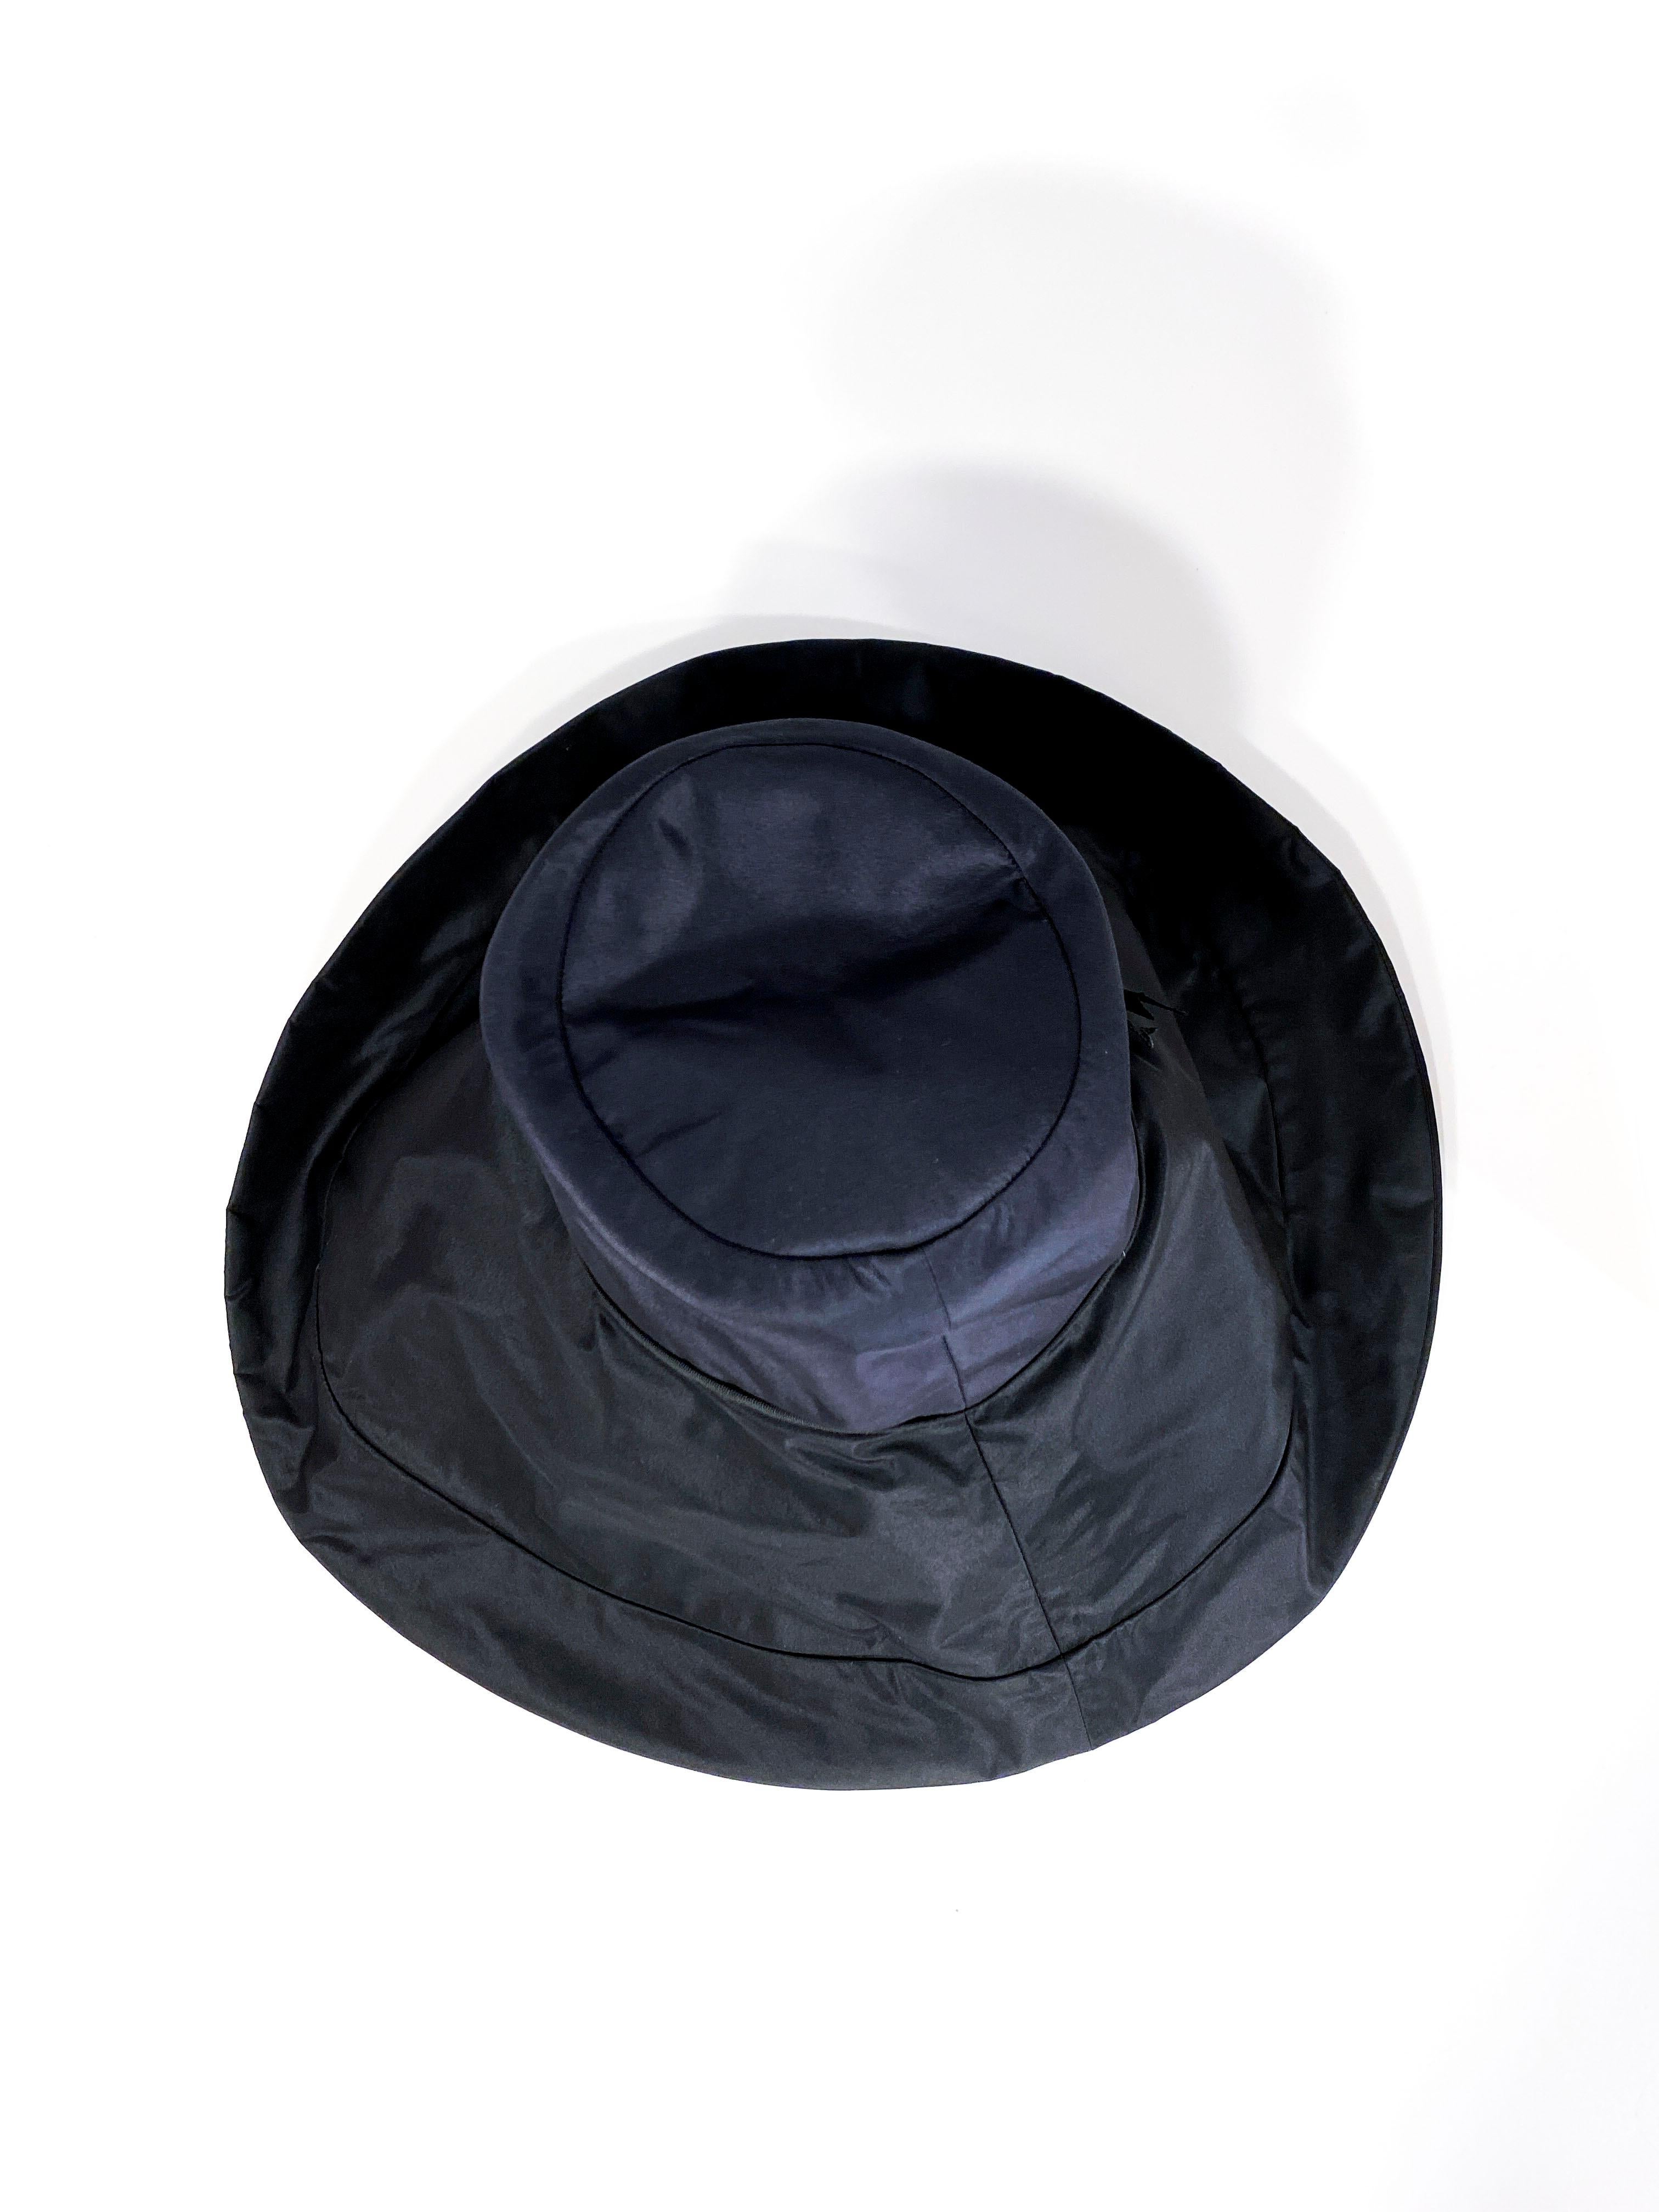 1960s/1970s Black Wide-Brimmed Unstructured Day Hat 1